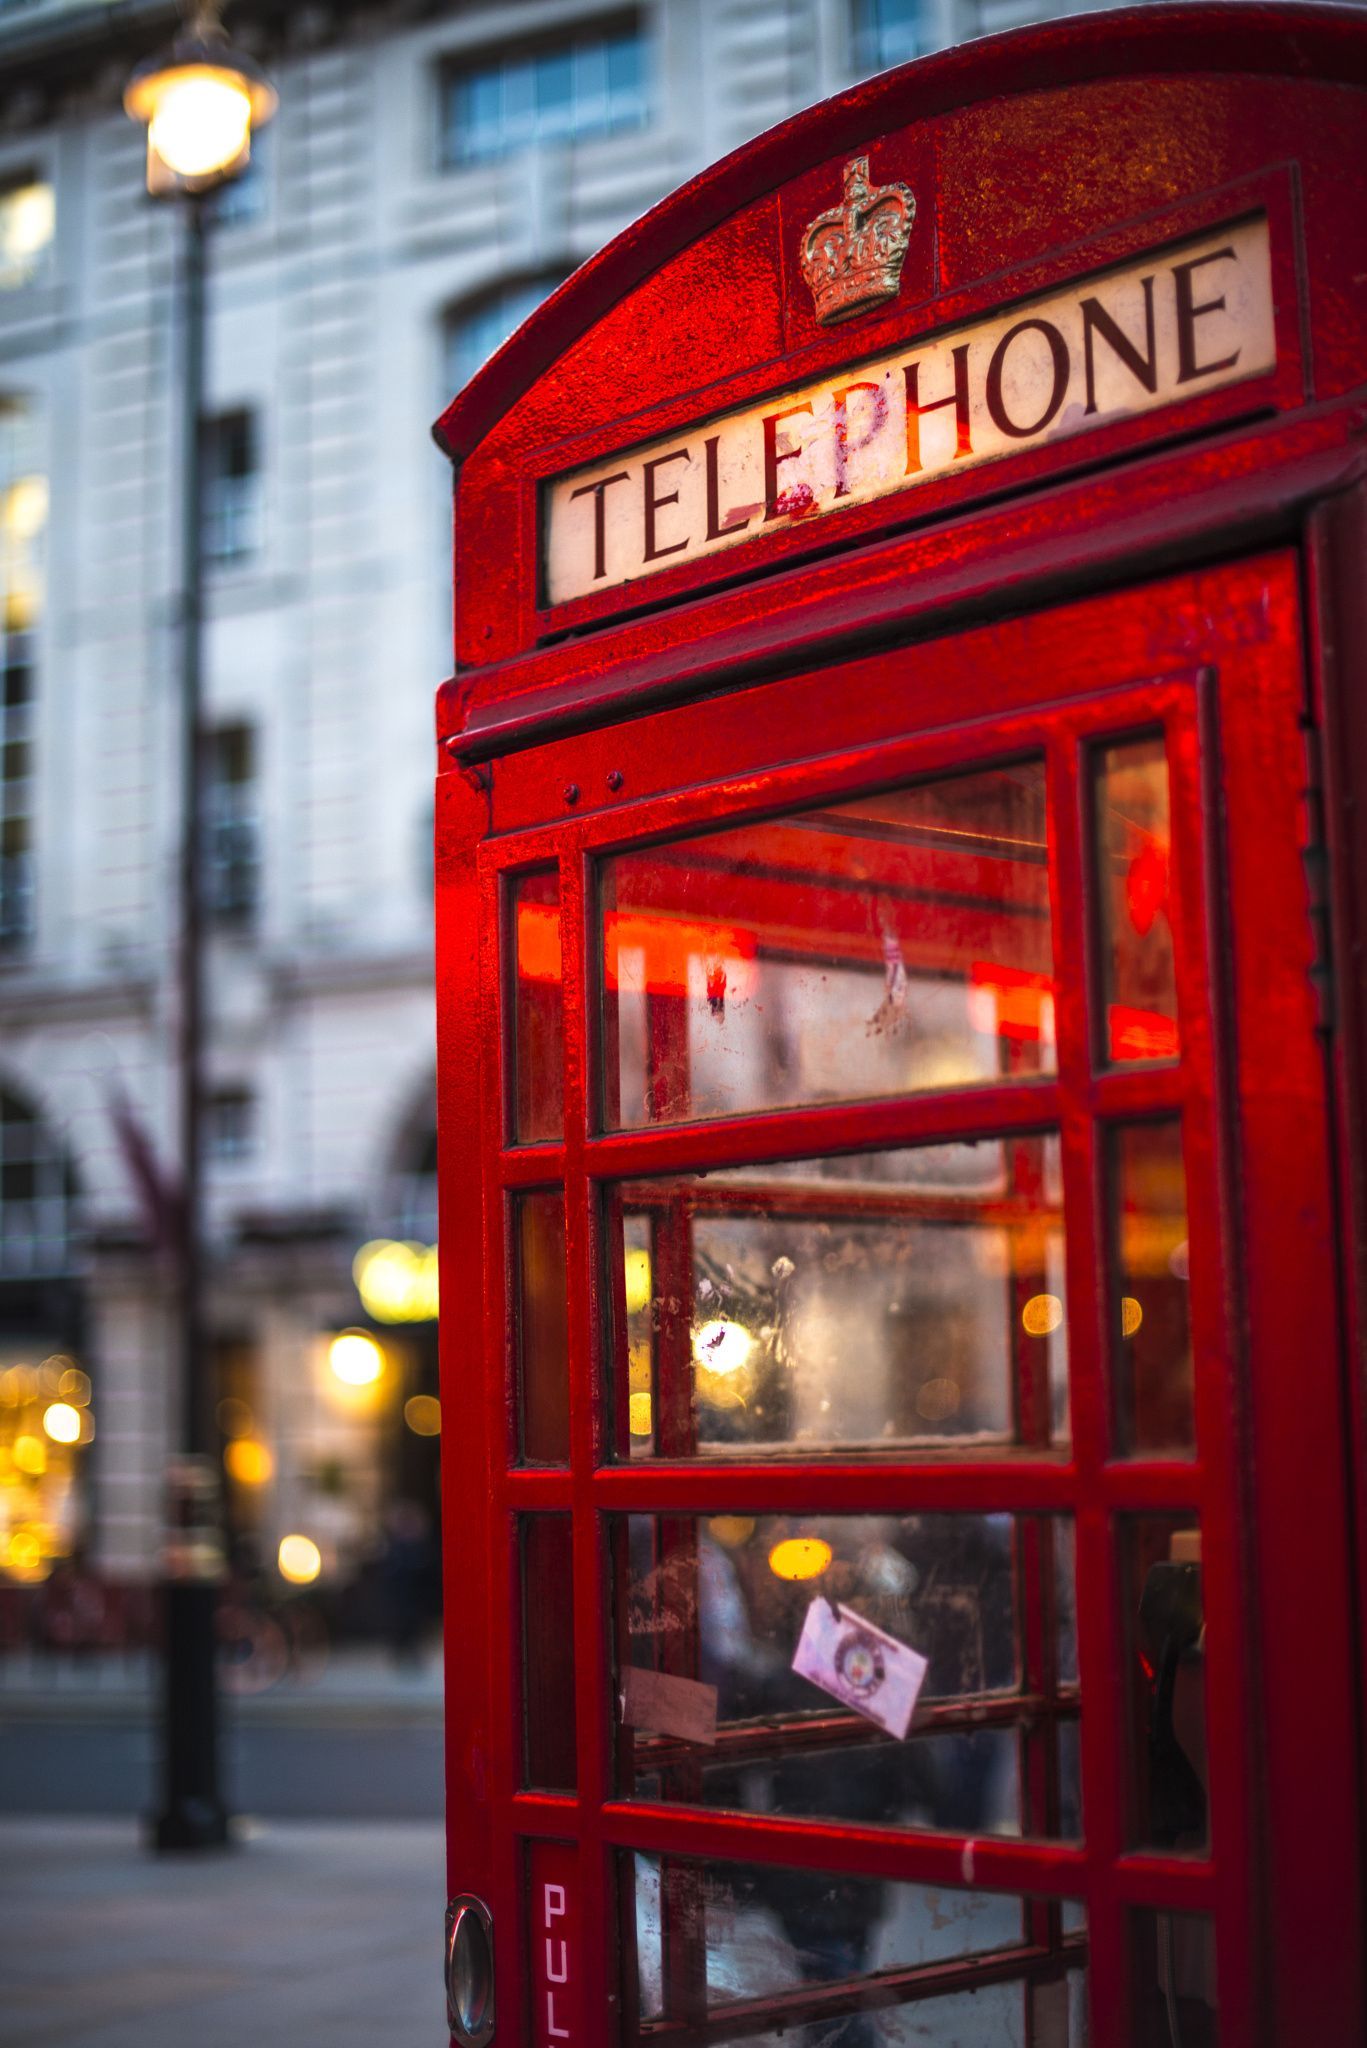 Red Telephone Booth, London. London telephone booth, Telephone booth, London phone booth